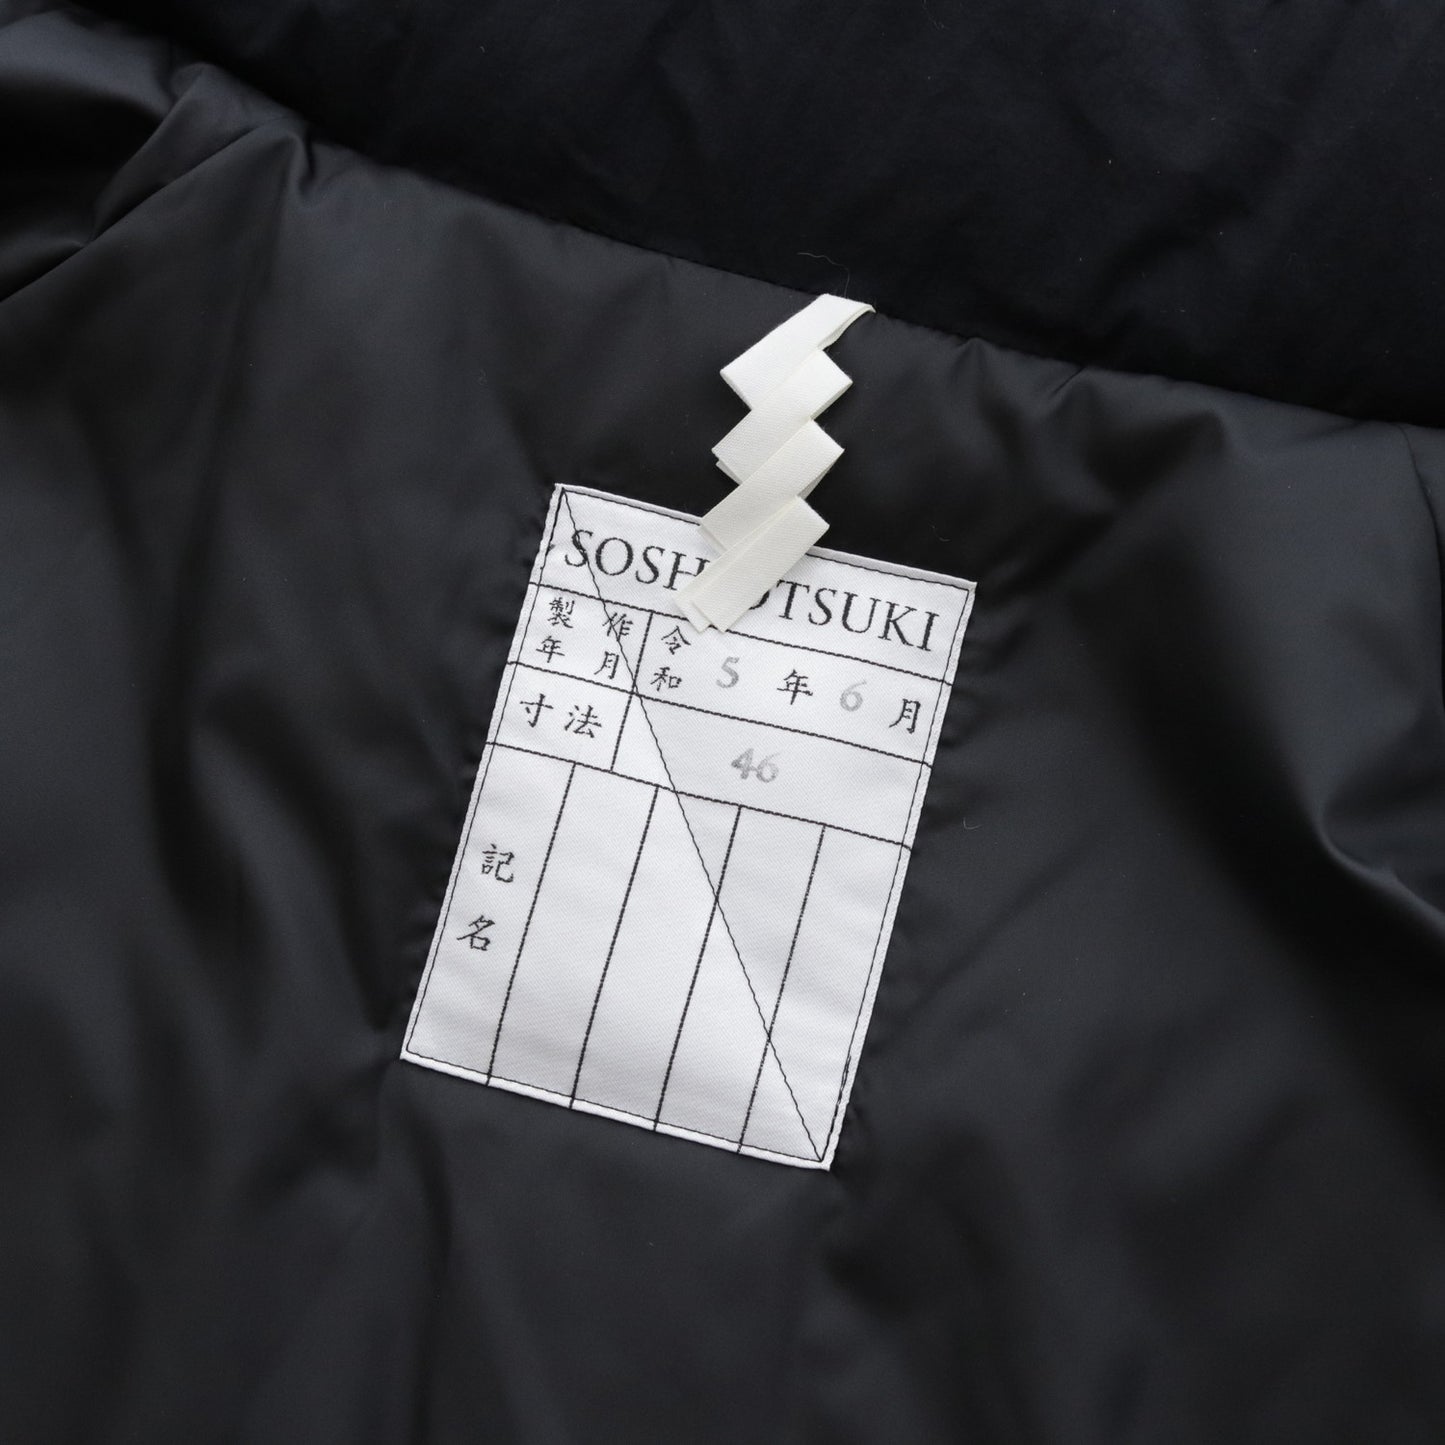 WIDE NECK SHELL JACKET #BLACK [S23AW11BL]